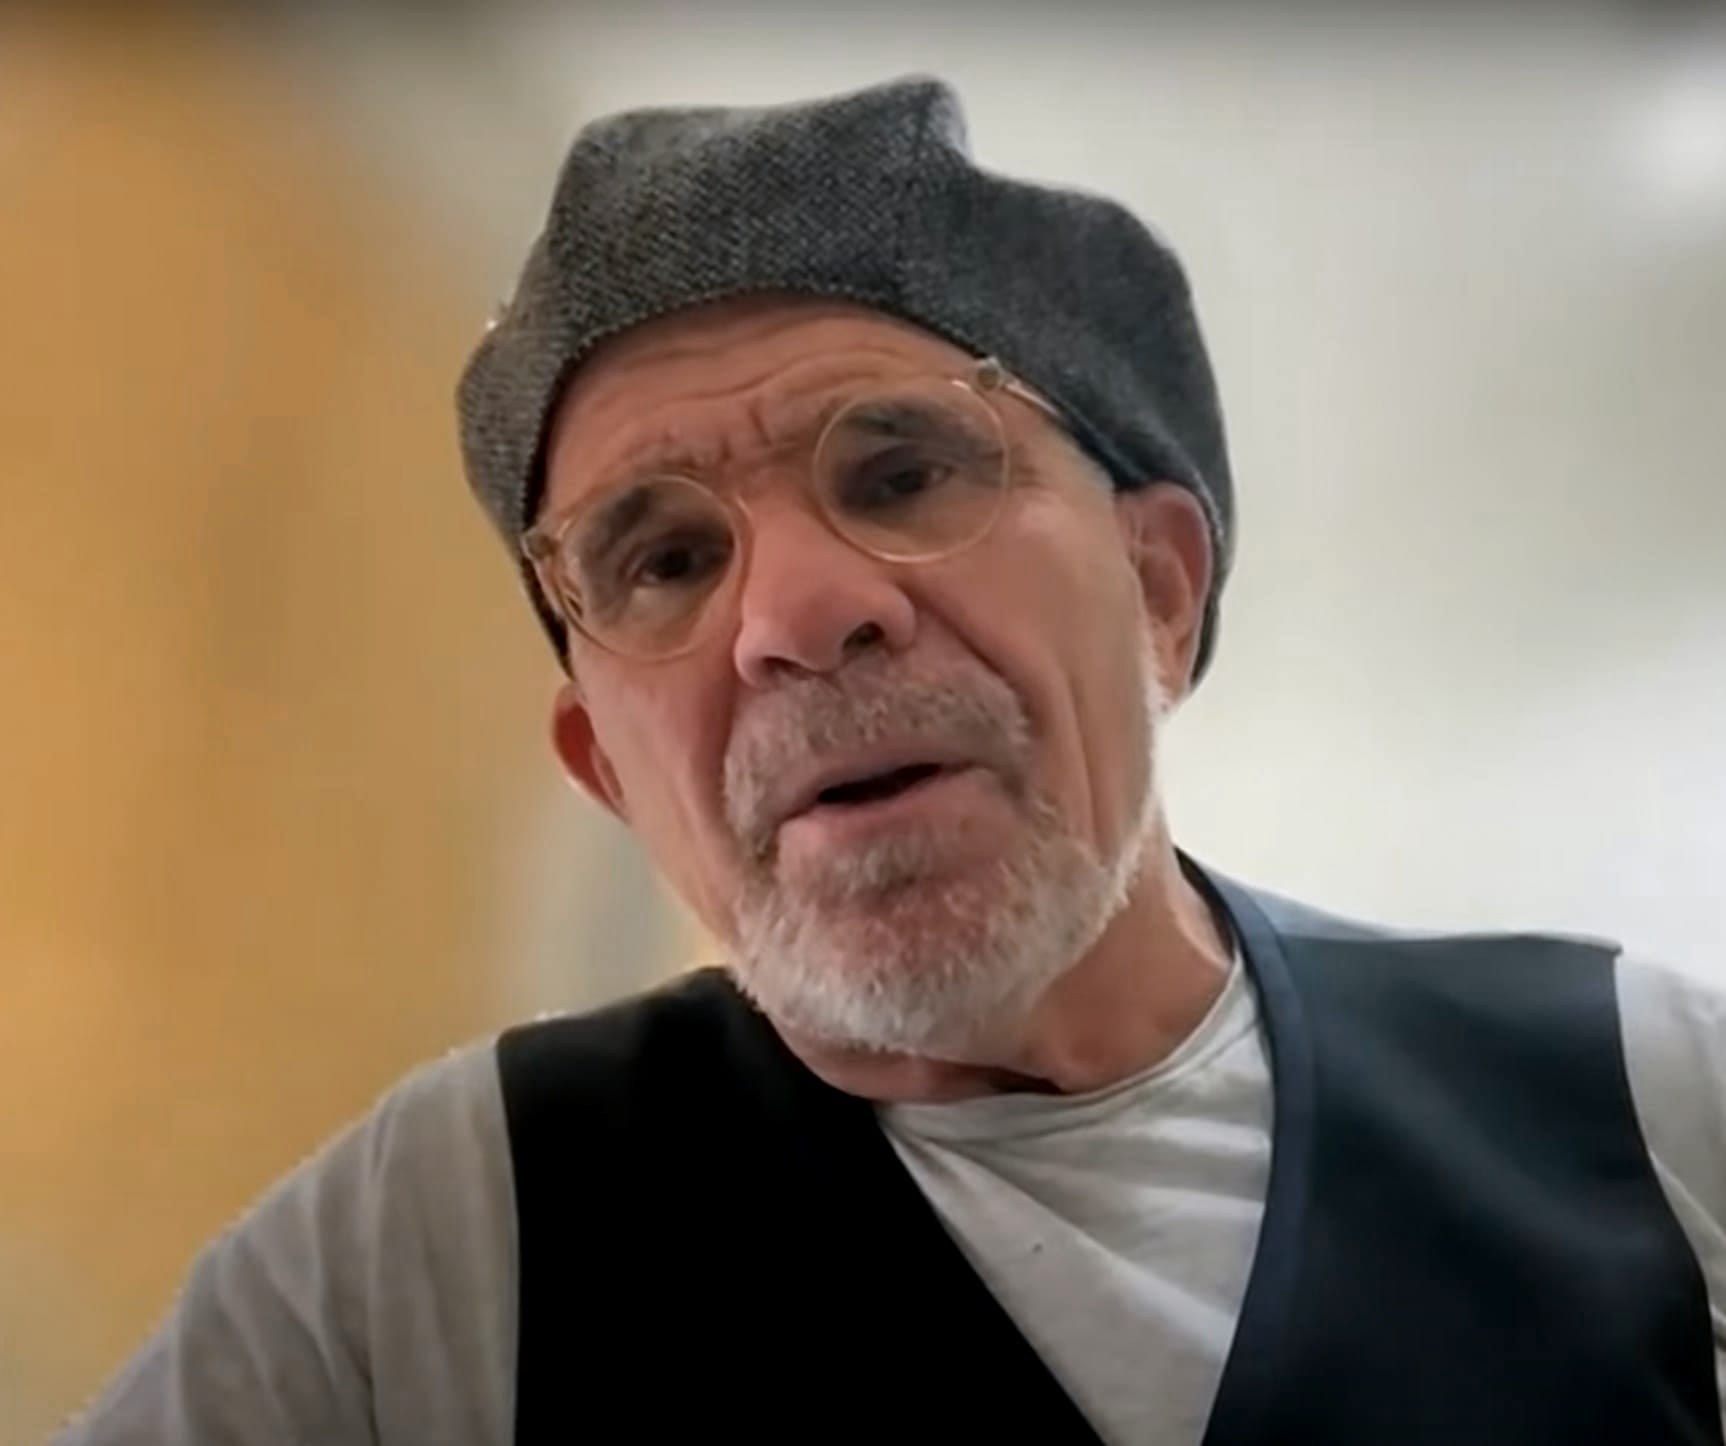 That Time 'Sound of Freedom' Producers Asked David Mamet to Write A Hunter Biden Script